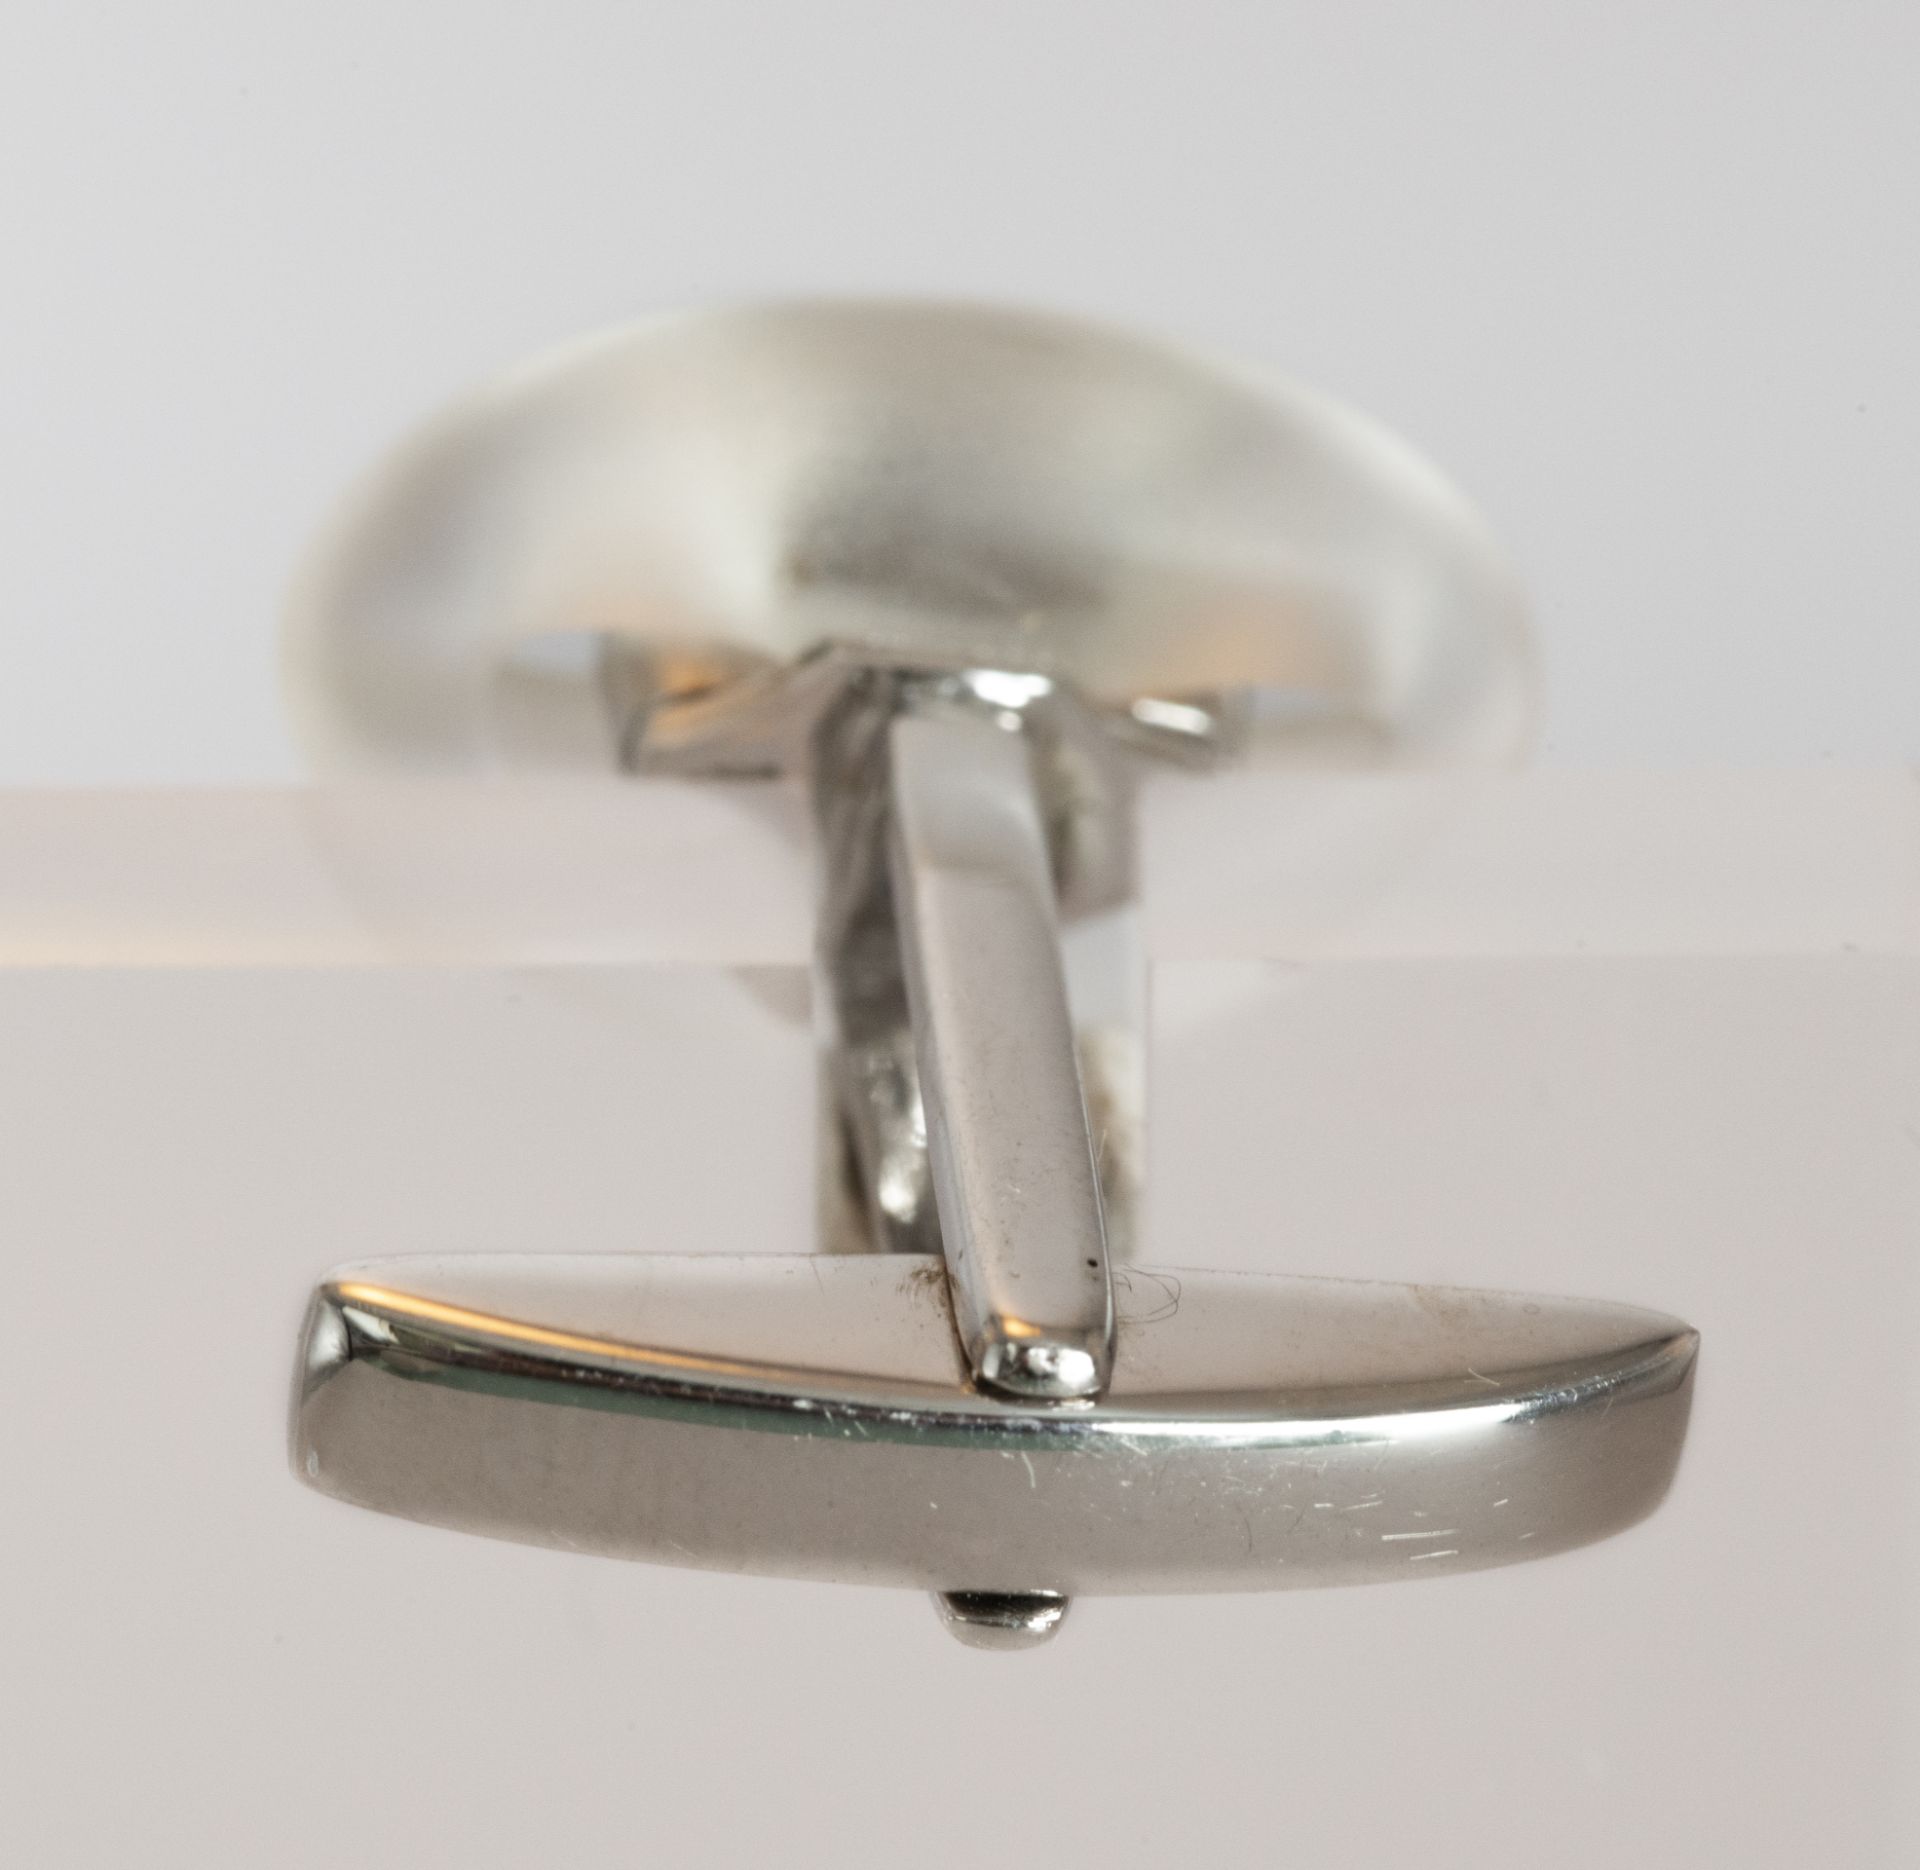 18 kt white gold and diamond cufflinks - Image 4 of 4